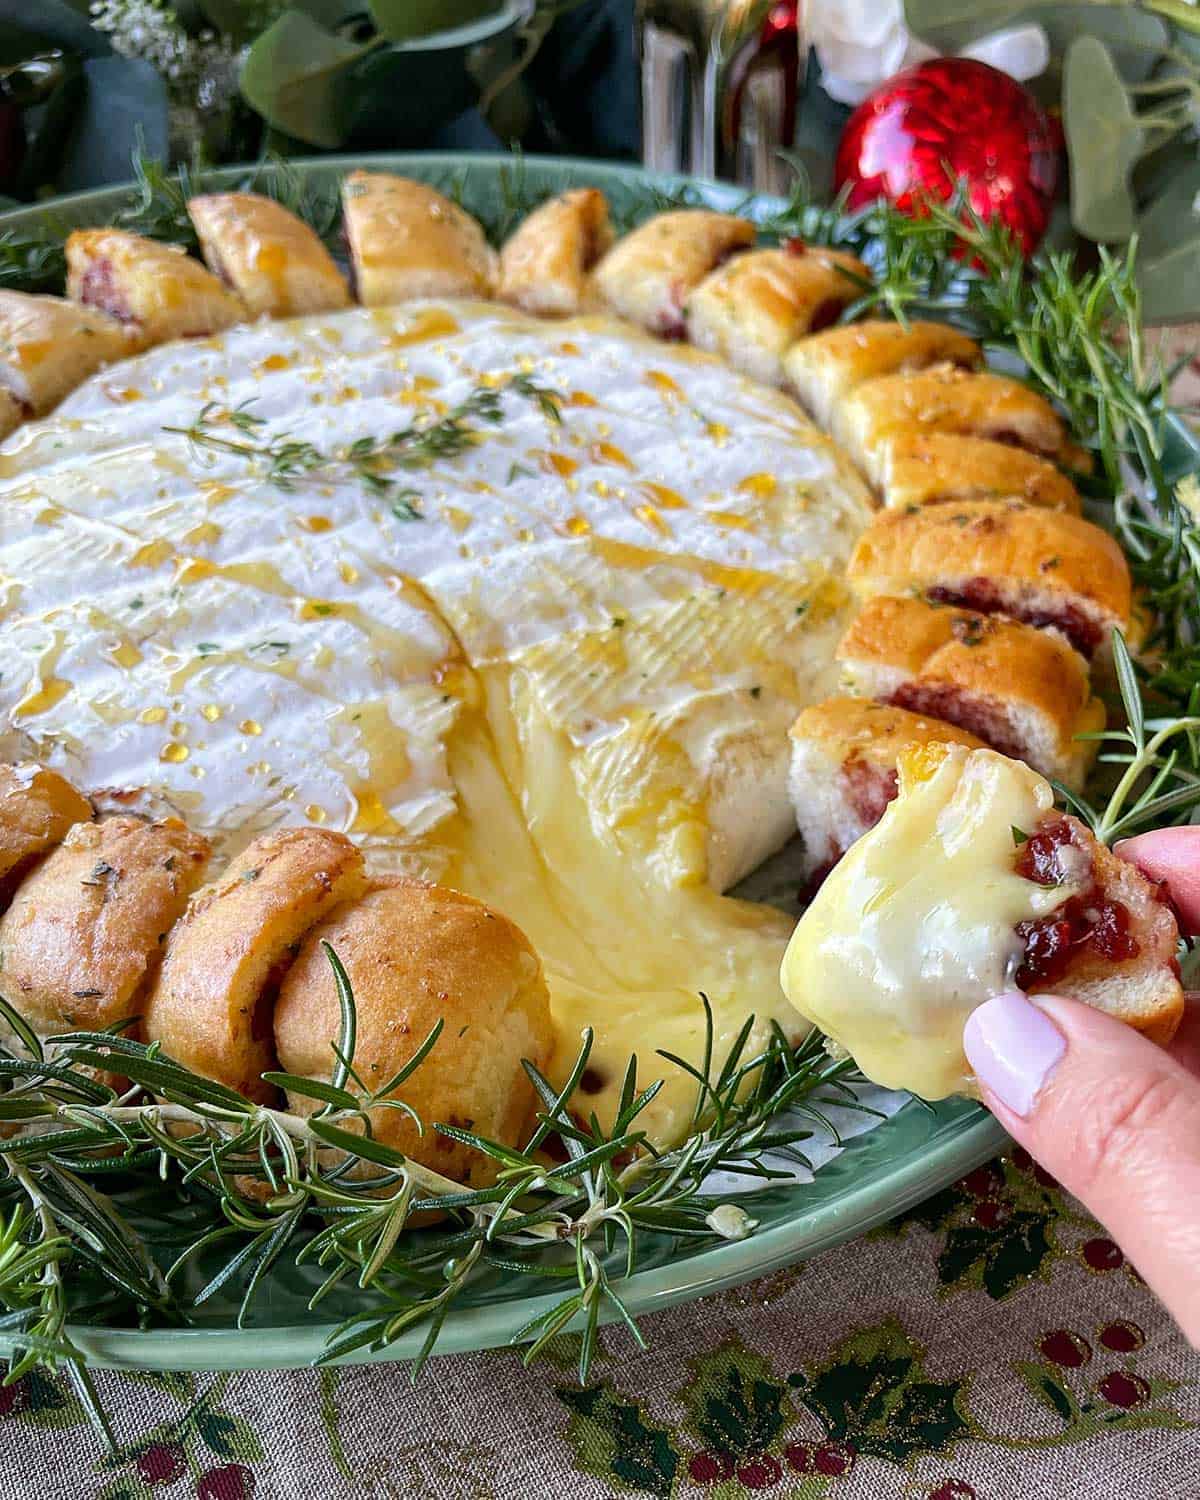 A hand pulling a piece of cheesy bread off the Brie Wreath.